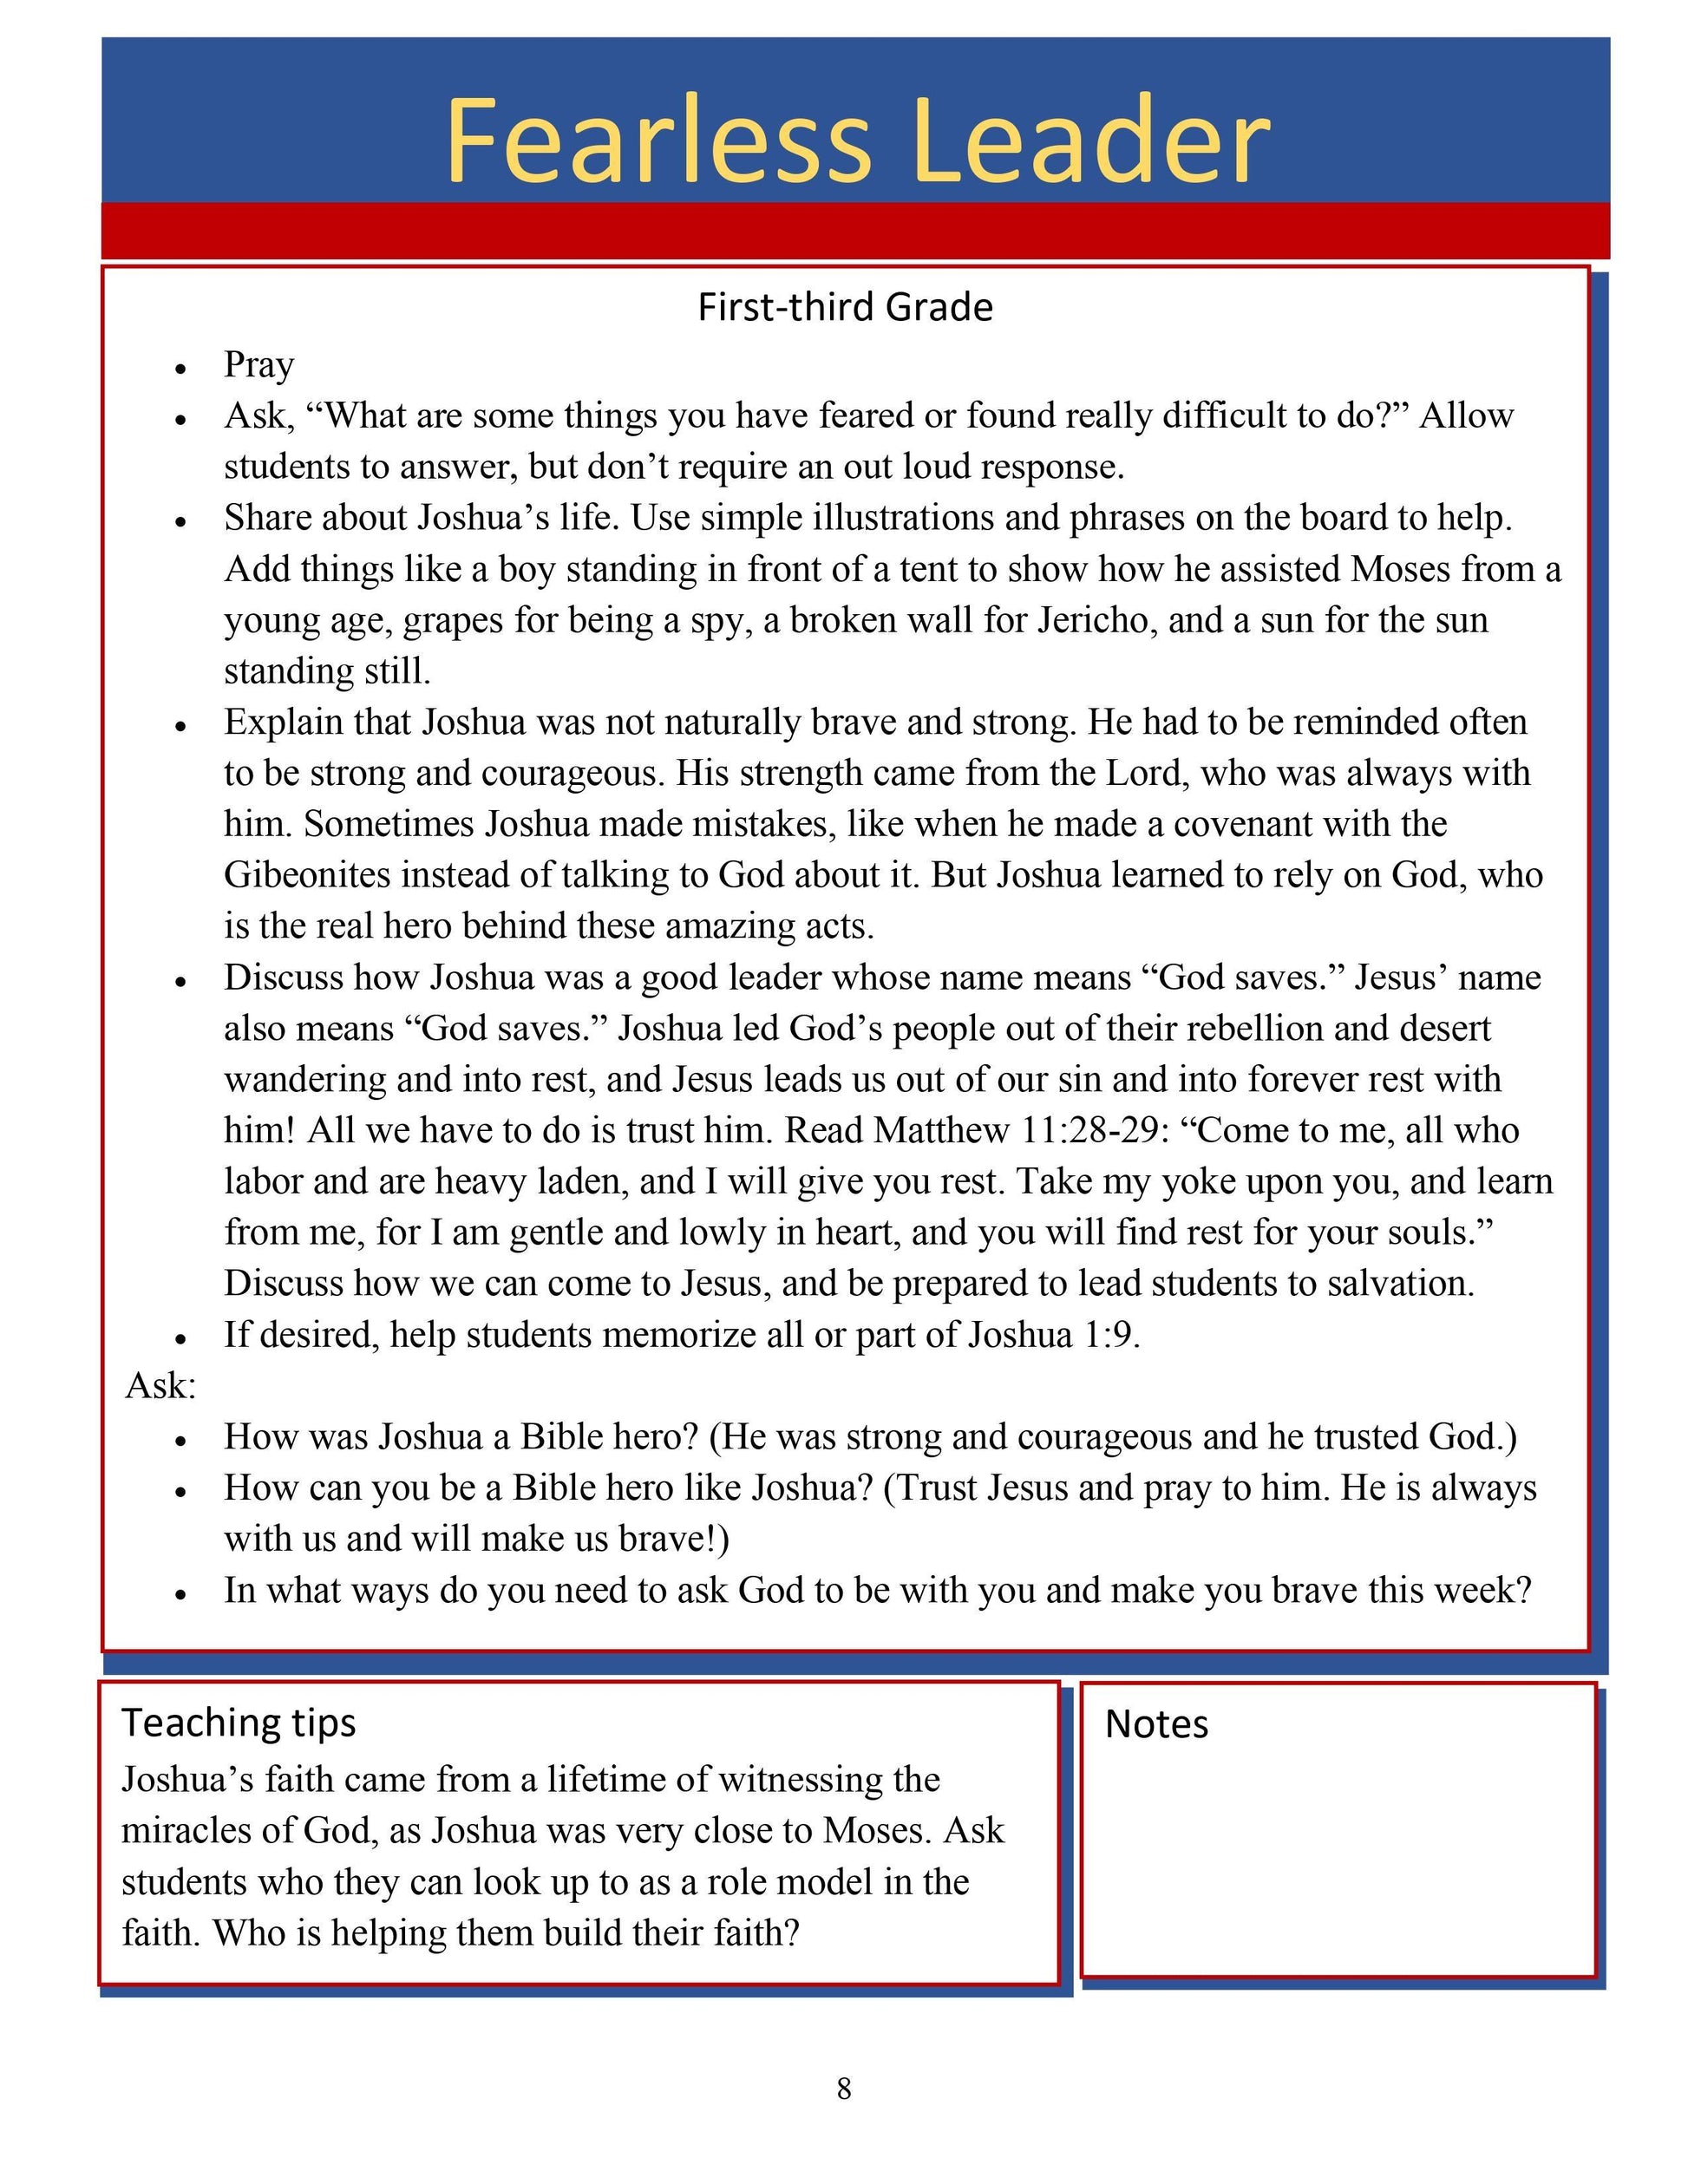 Bible Heroes Unit Two: 5-Lesson Sunday School Curriculum (download only) - Sunday School Store 